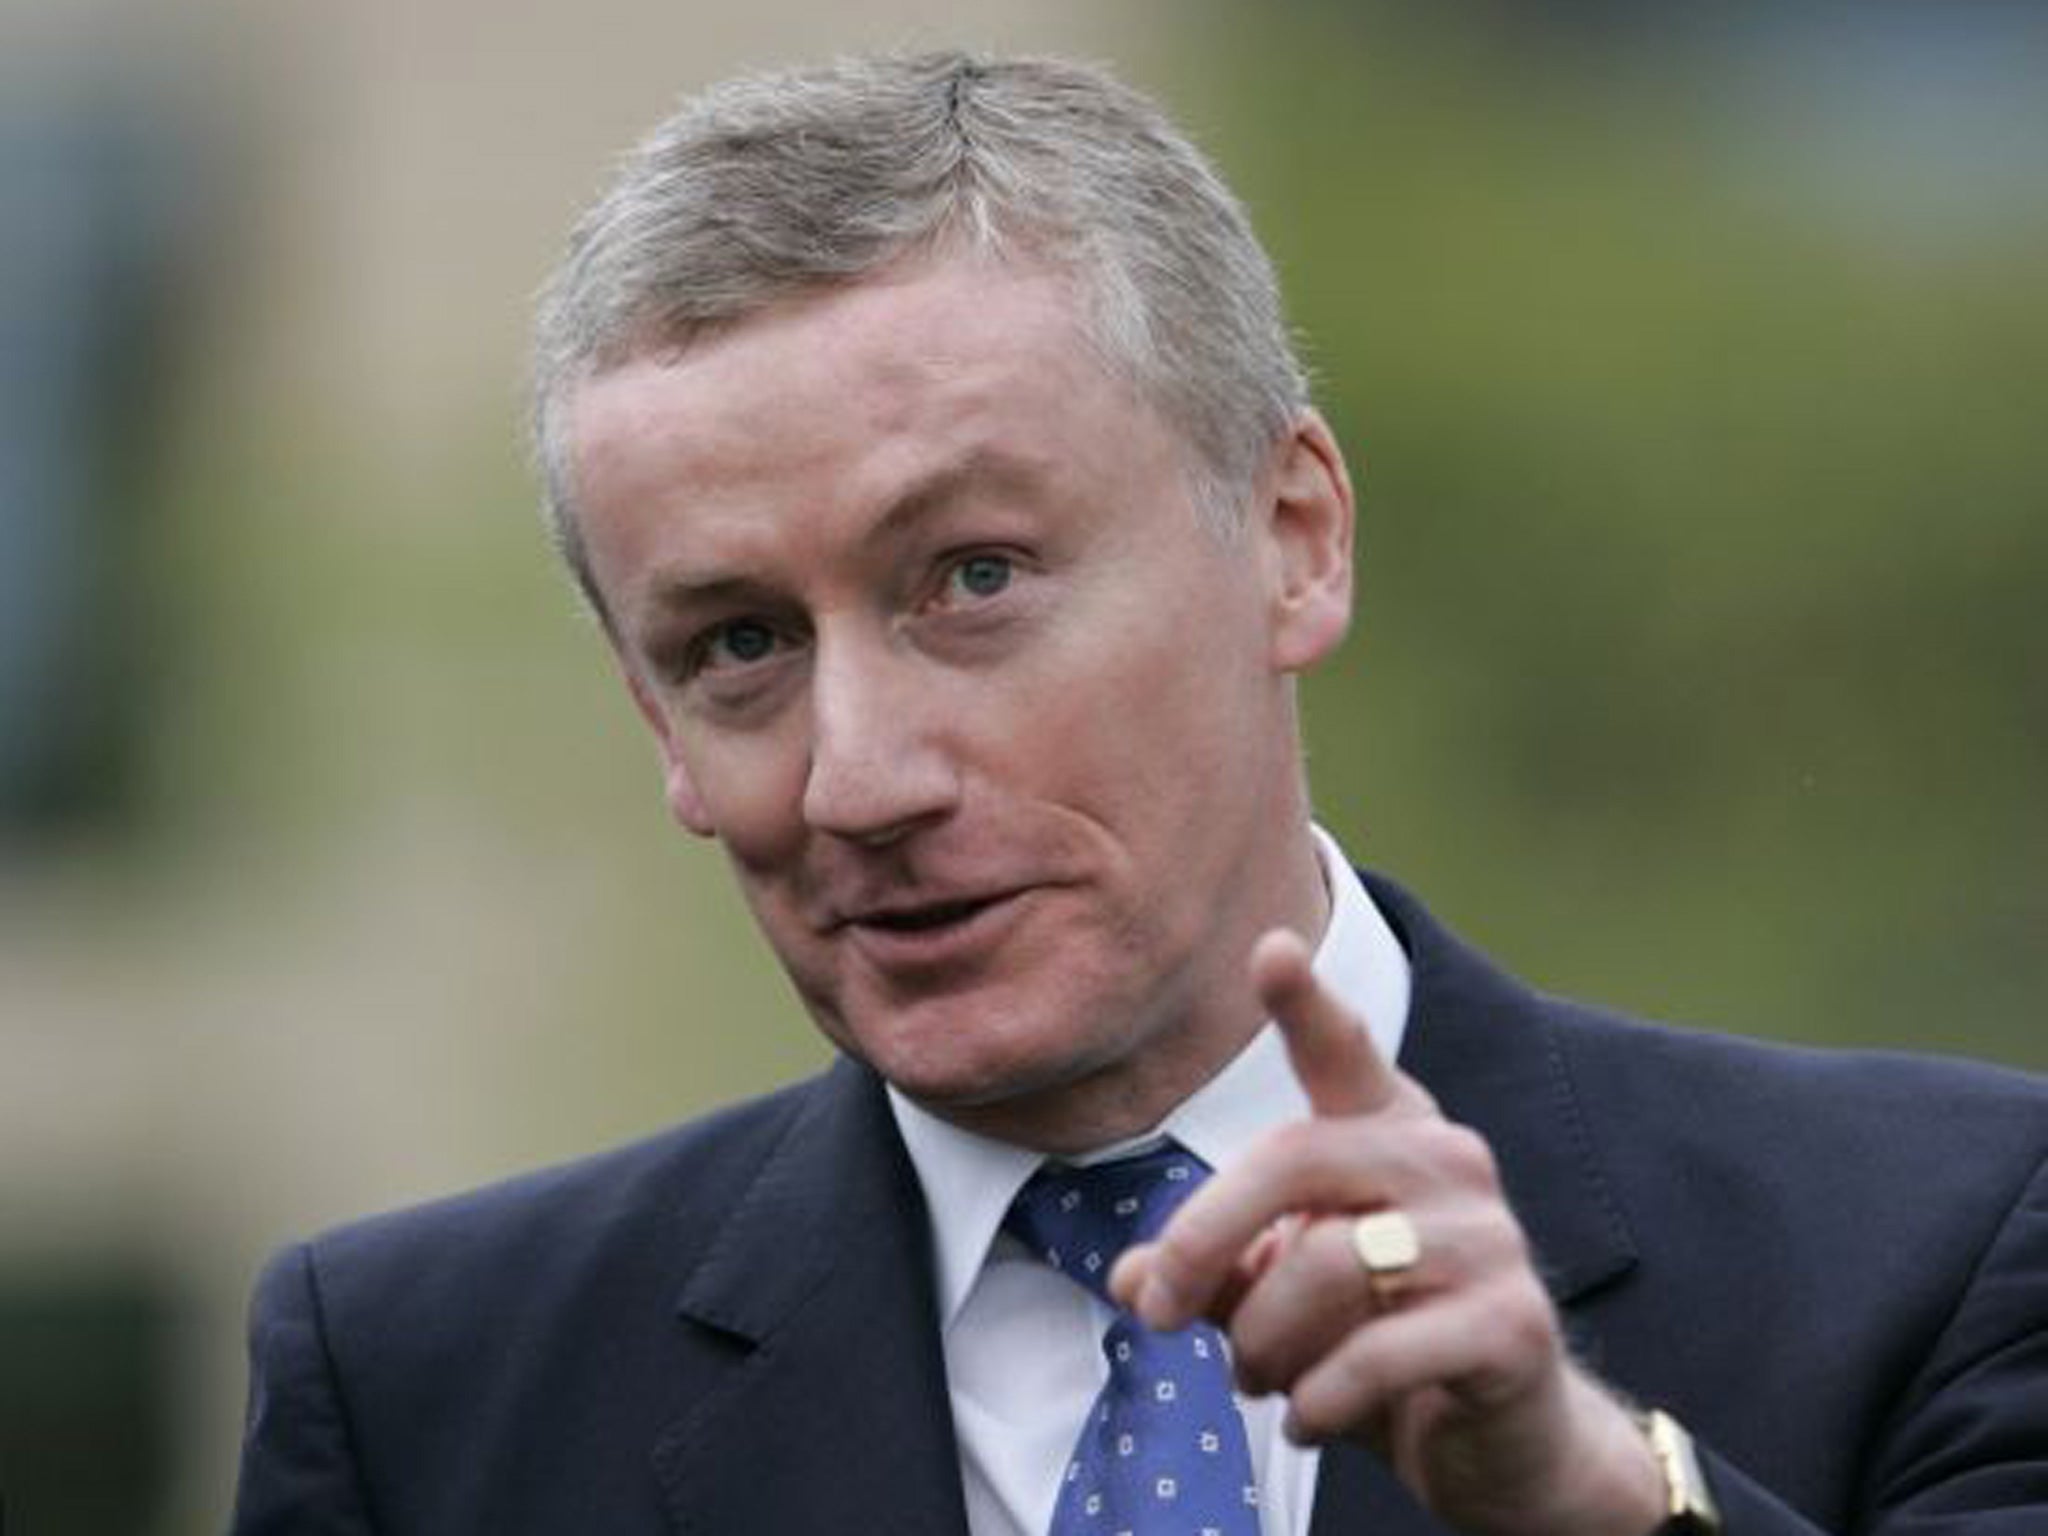 Tanking bank: Book claims RBS sponsored motor sport because Fred Goodwin is a fan